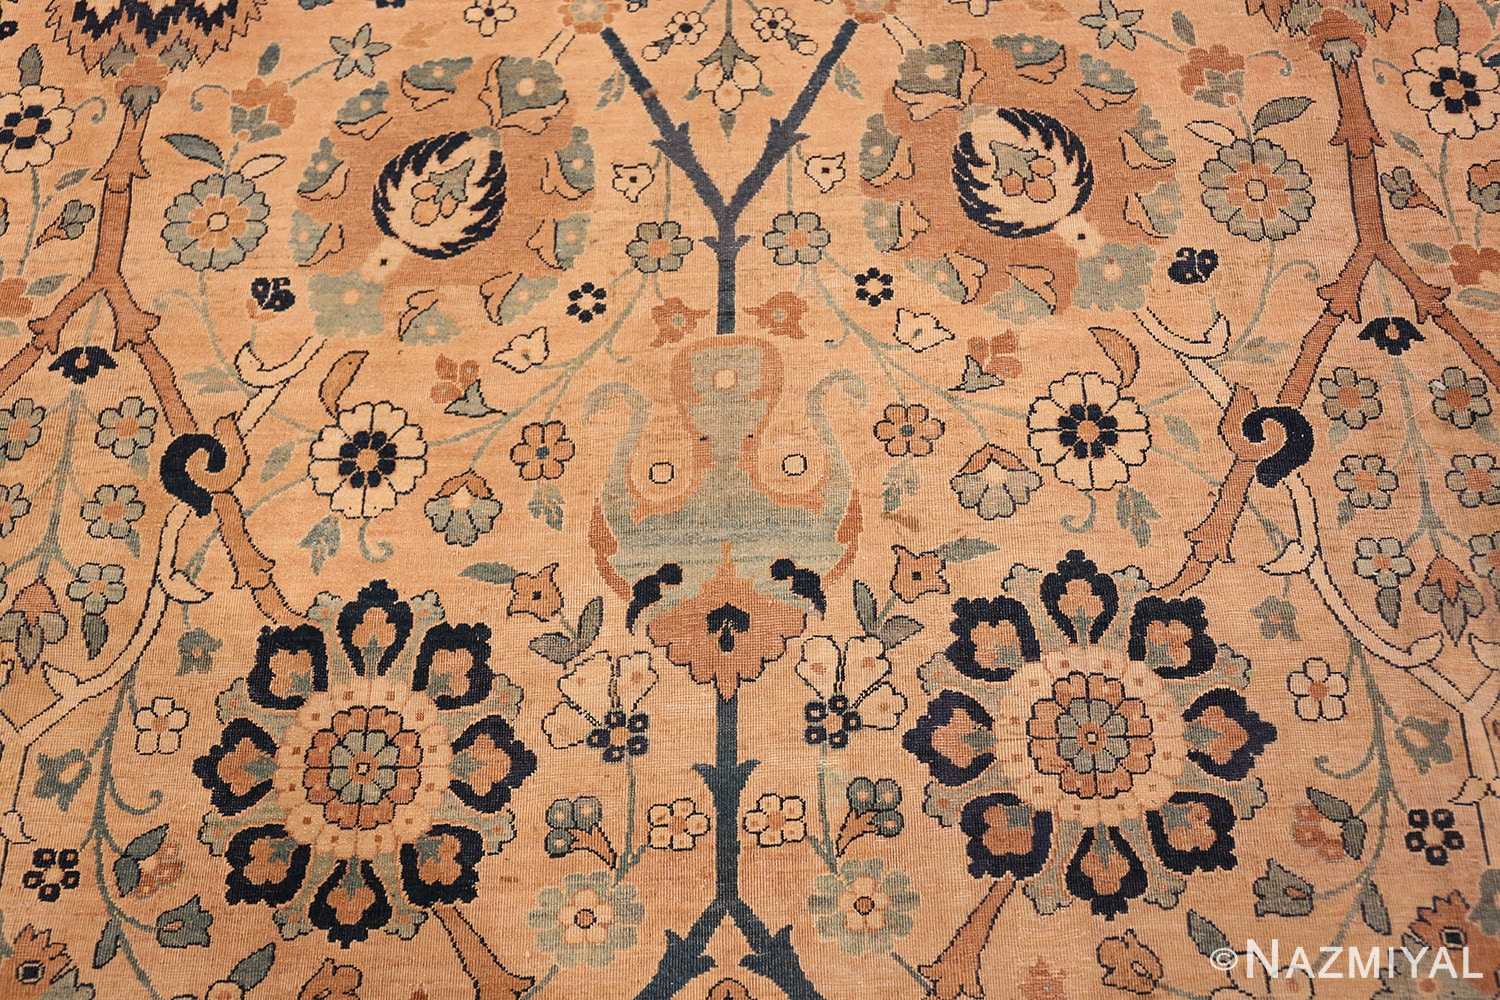 A detail blue flower picture of the large vase design antique persian kerman rug #50701 from Nazmiyal Antique Rugs NYC